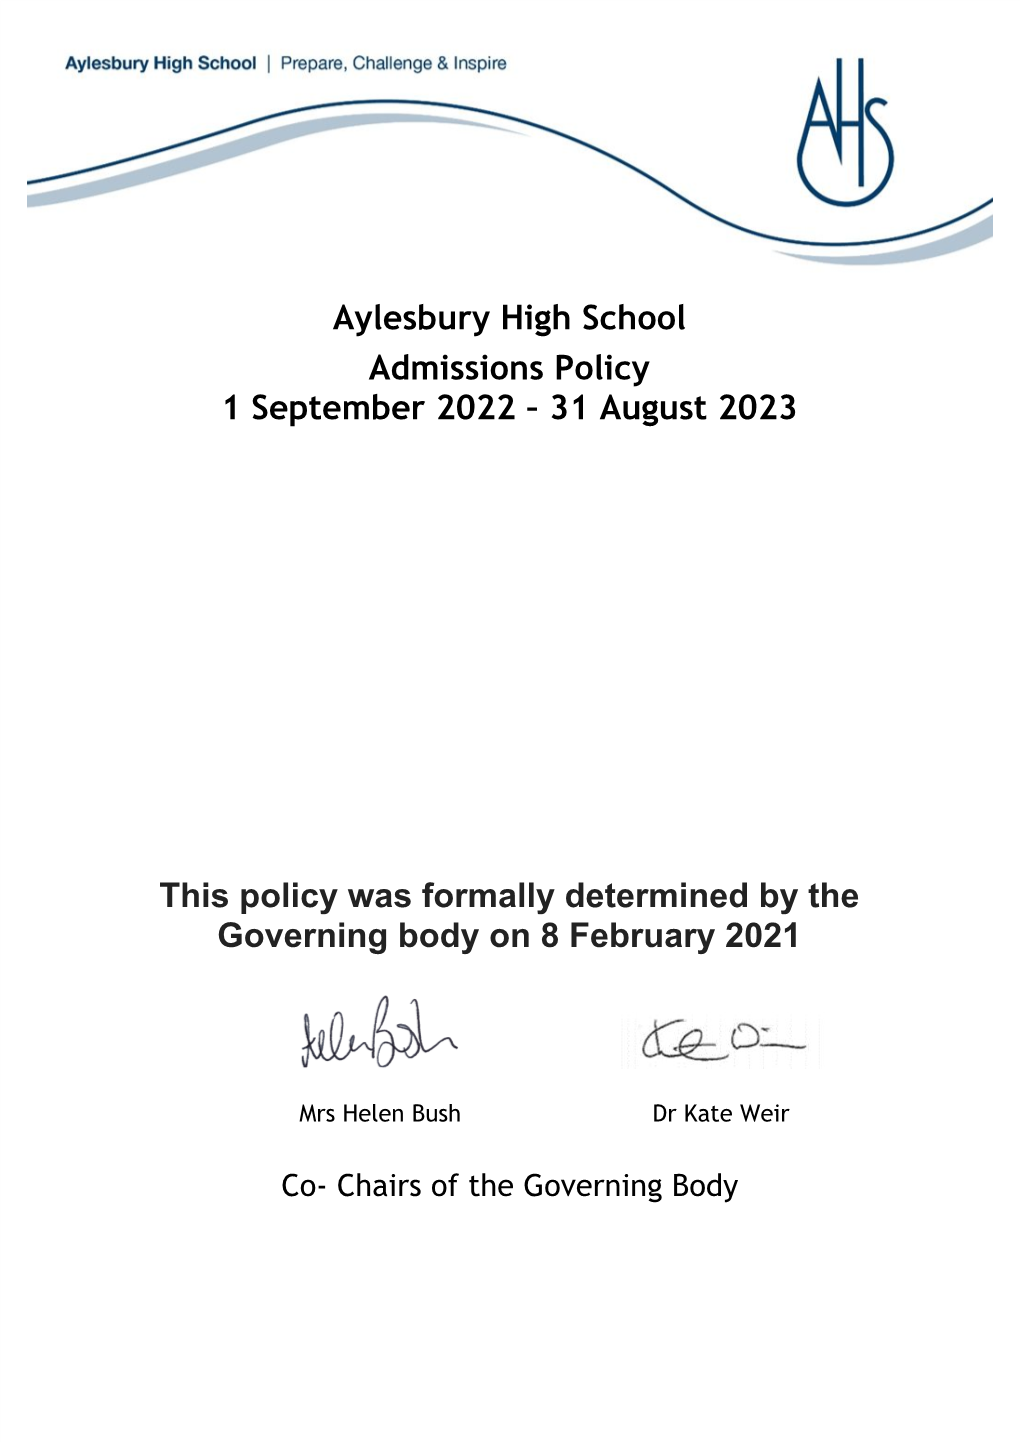 Aylesbury High School Admissions Policy 1 September 2022 – 31 August 2023